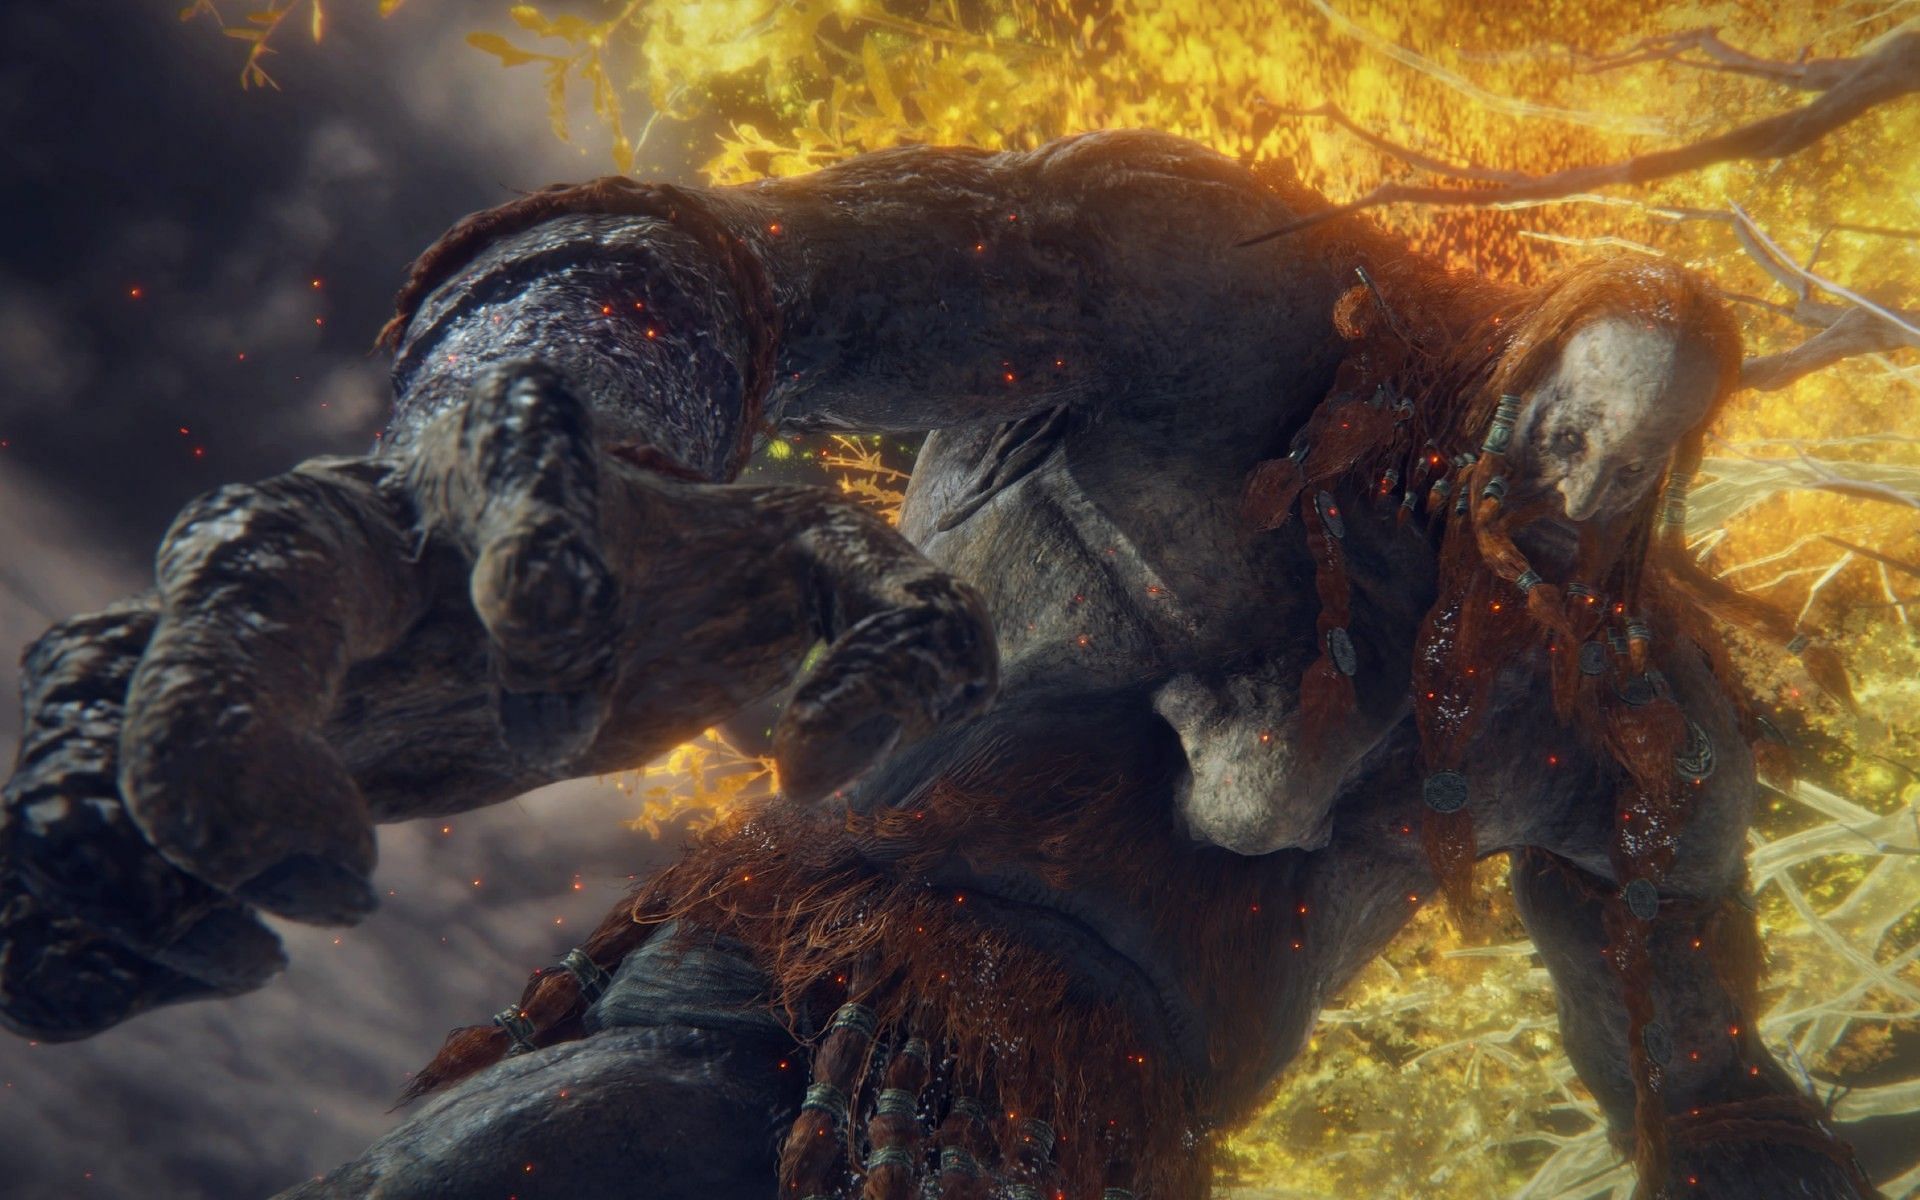 Players will need to defeat the Fire Giant to move on to the Forge of the Giants. (Image via FromSoftware)